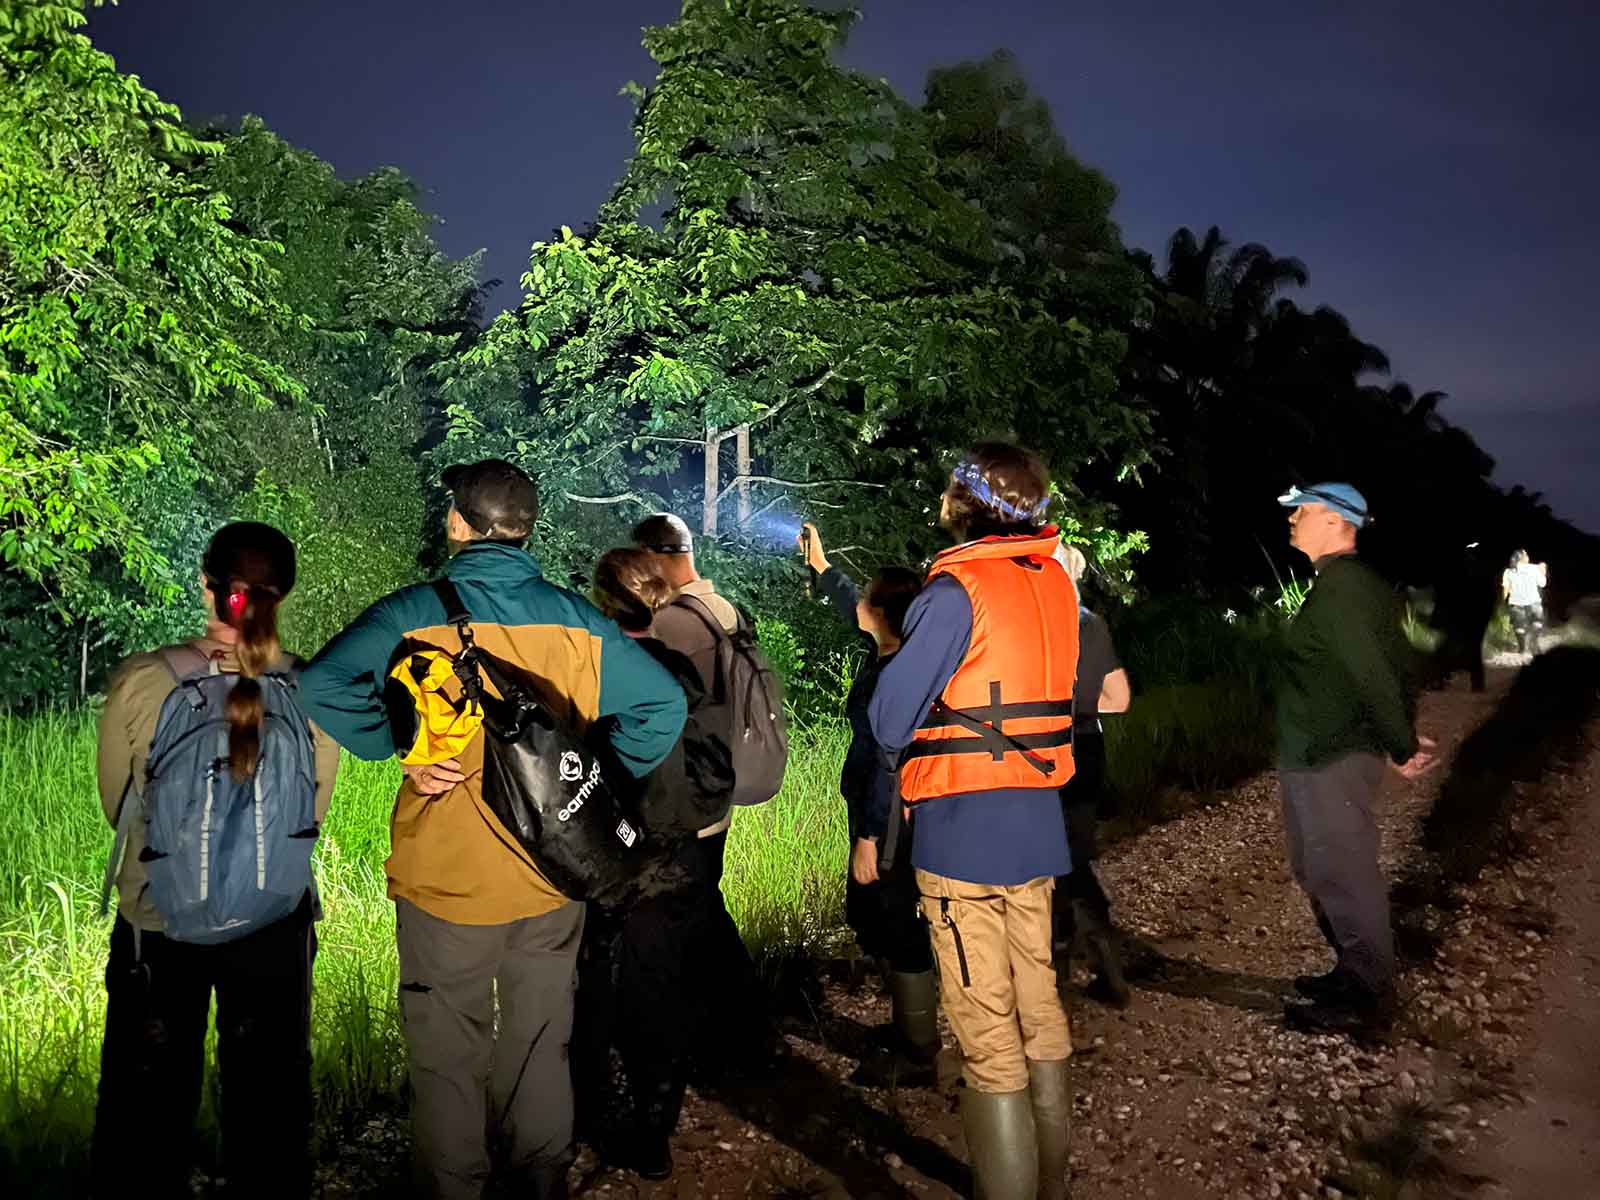 Royal Holloway students at DGFC go on a night walk in a plantation